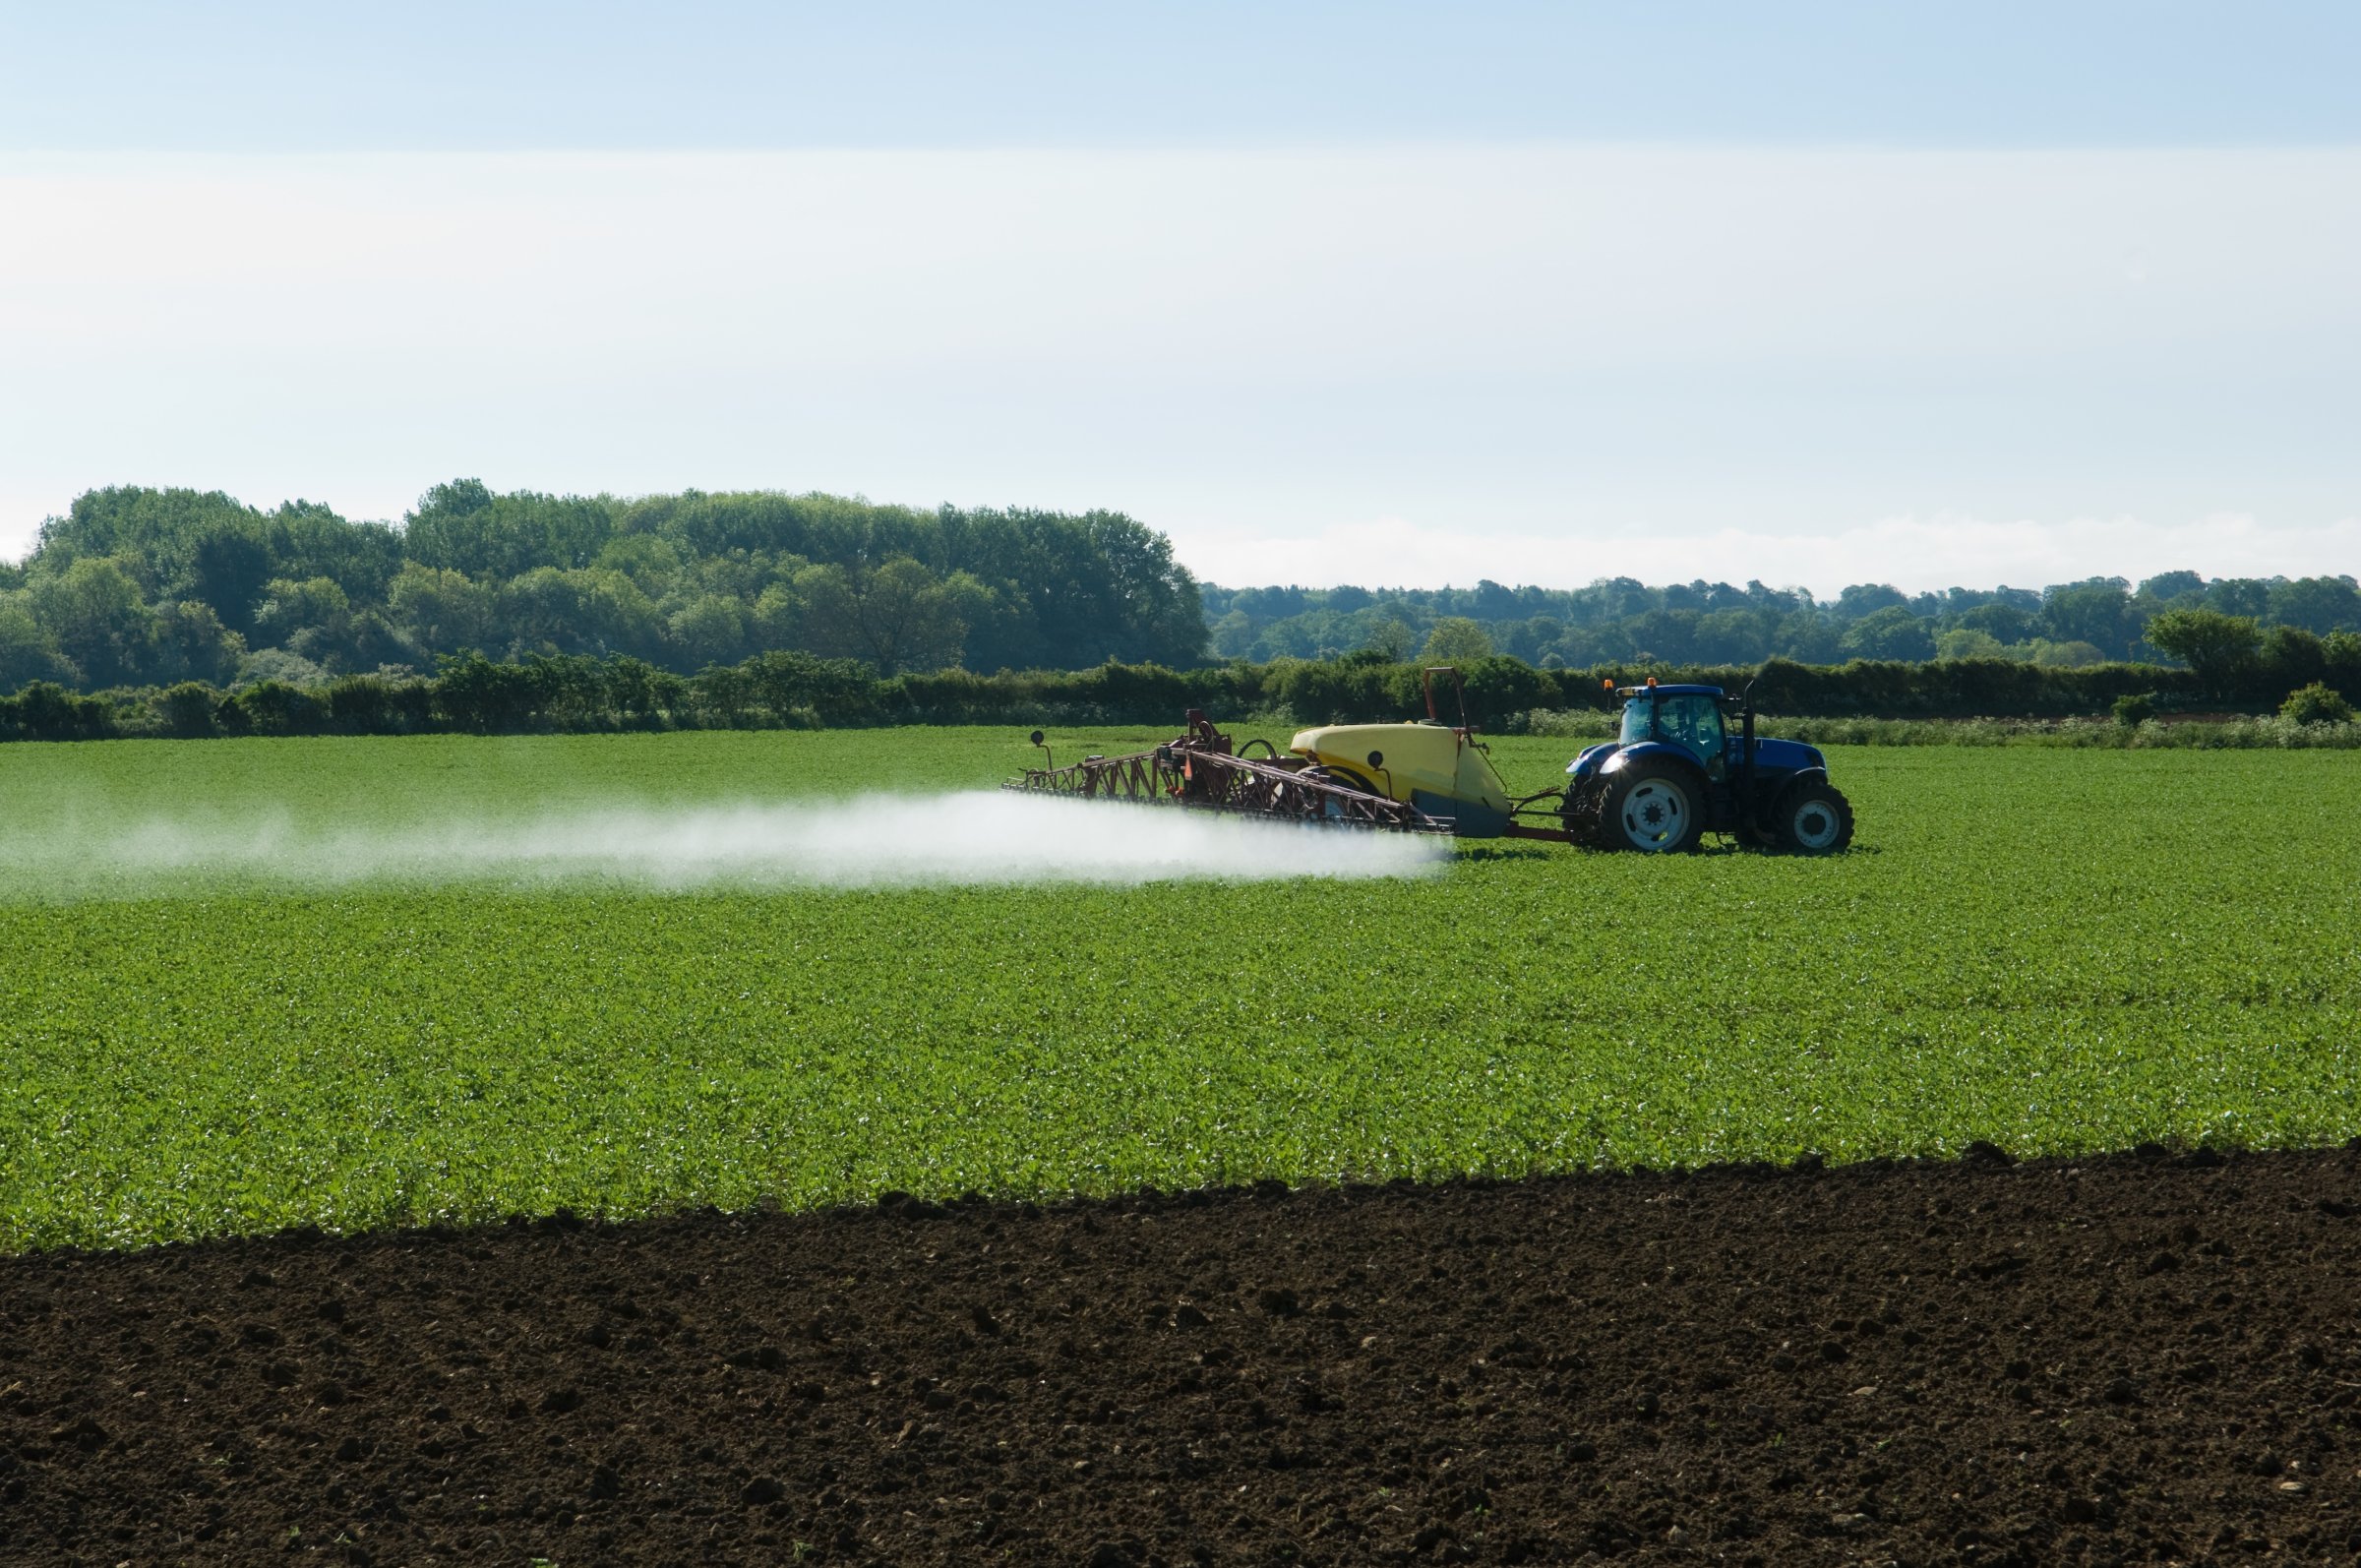 Tractor and crop sprayer spraying in field